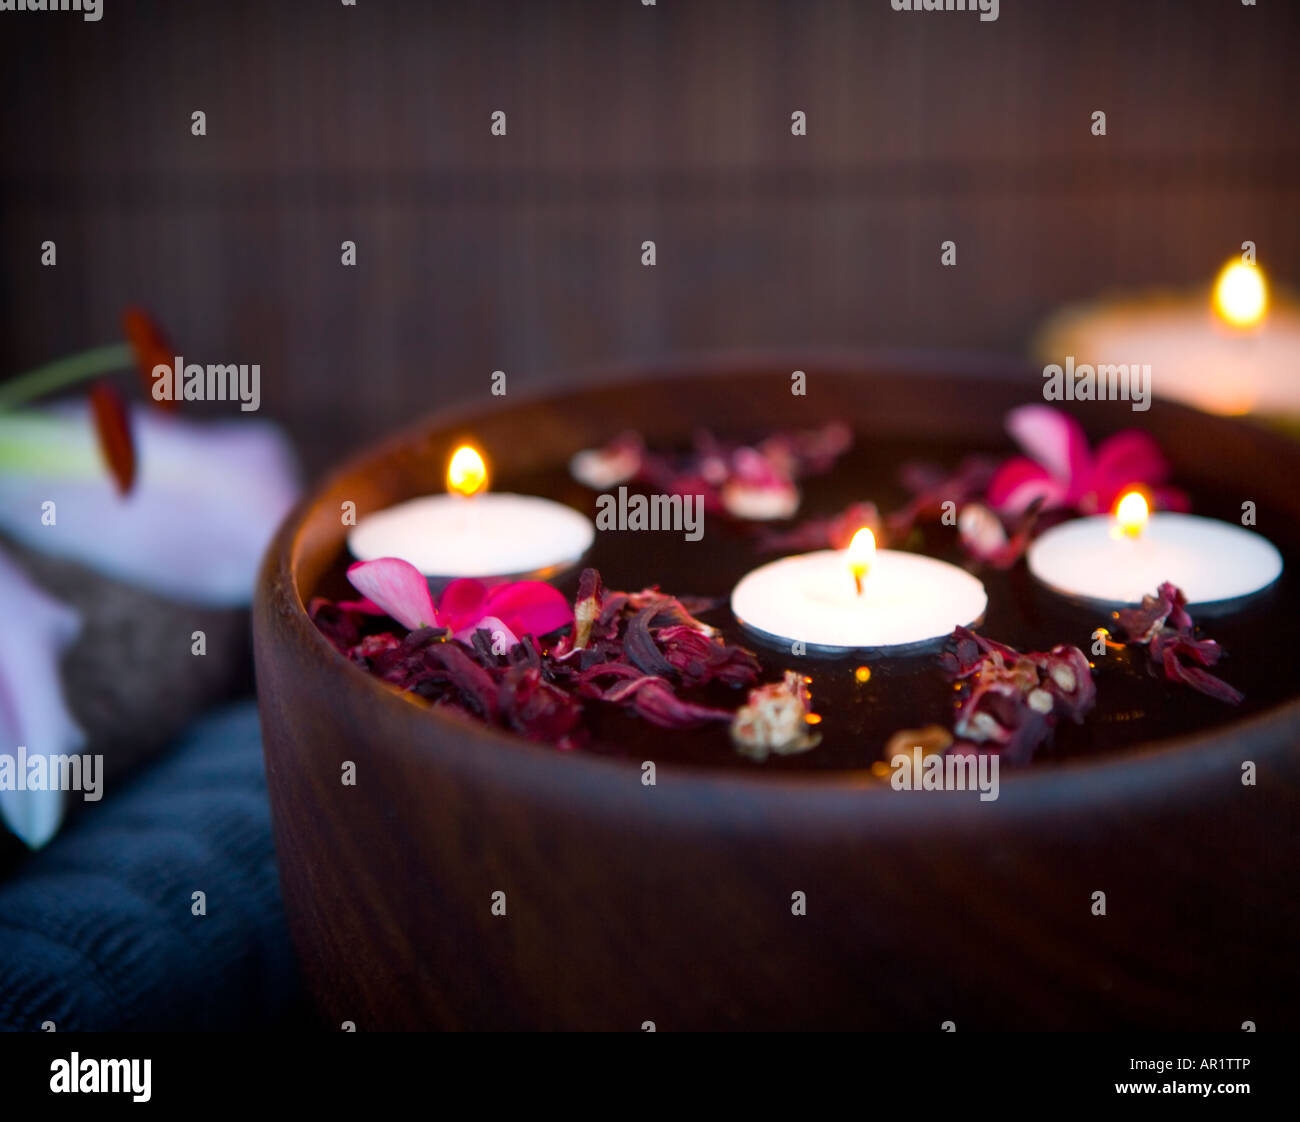 Spa setting with floating candles and folded towels Stock Photo